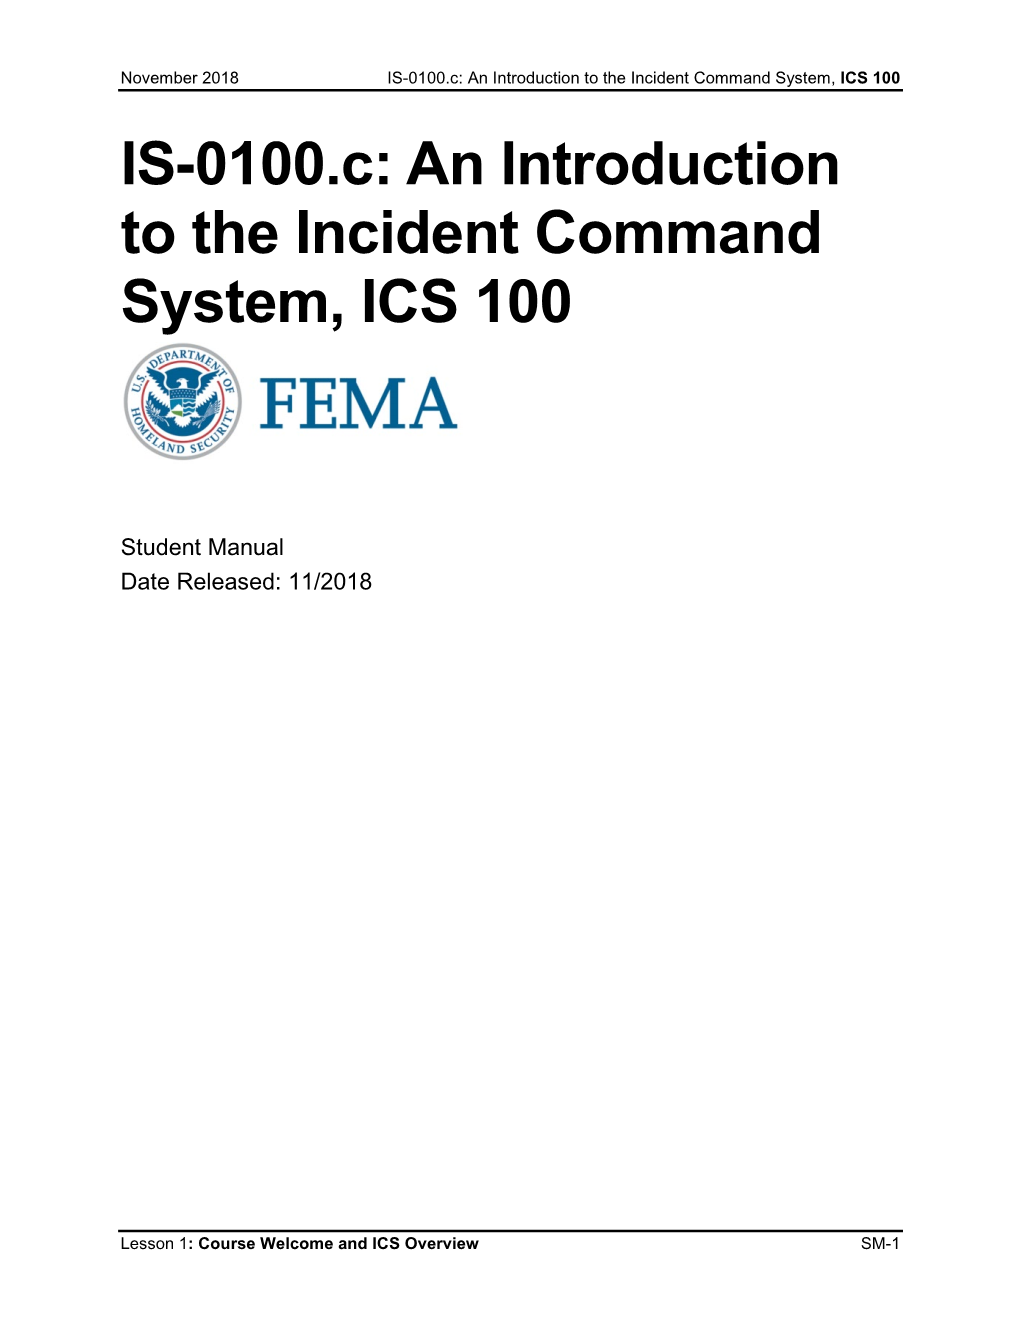 IS-0100.C: an Introduction to the Incident Command System, ICS 100 IS-0100.C: an Introduction to the Incident Command System, ICS 100